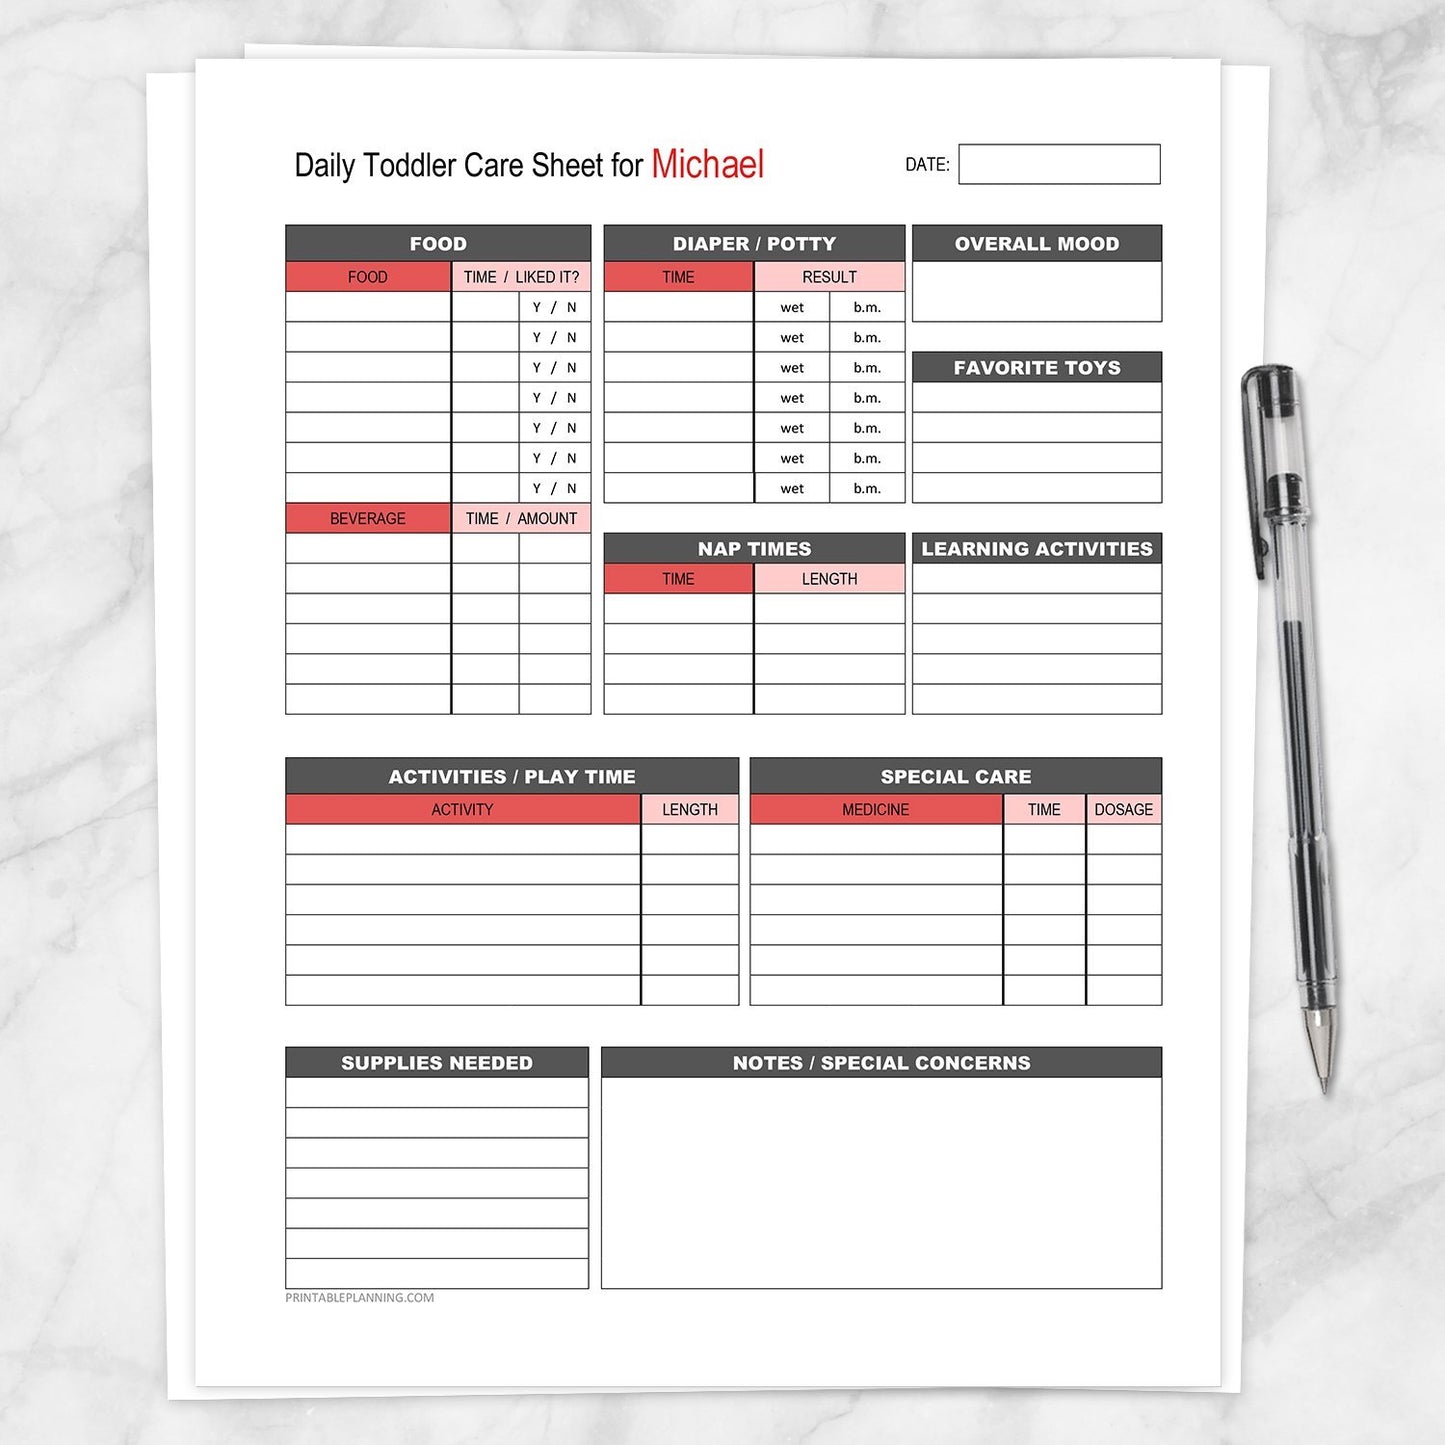 Printable Personalized Nanny Log - Daily Toddler Care Sheet in Red at Printable Planning